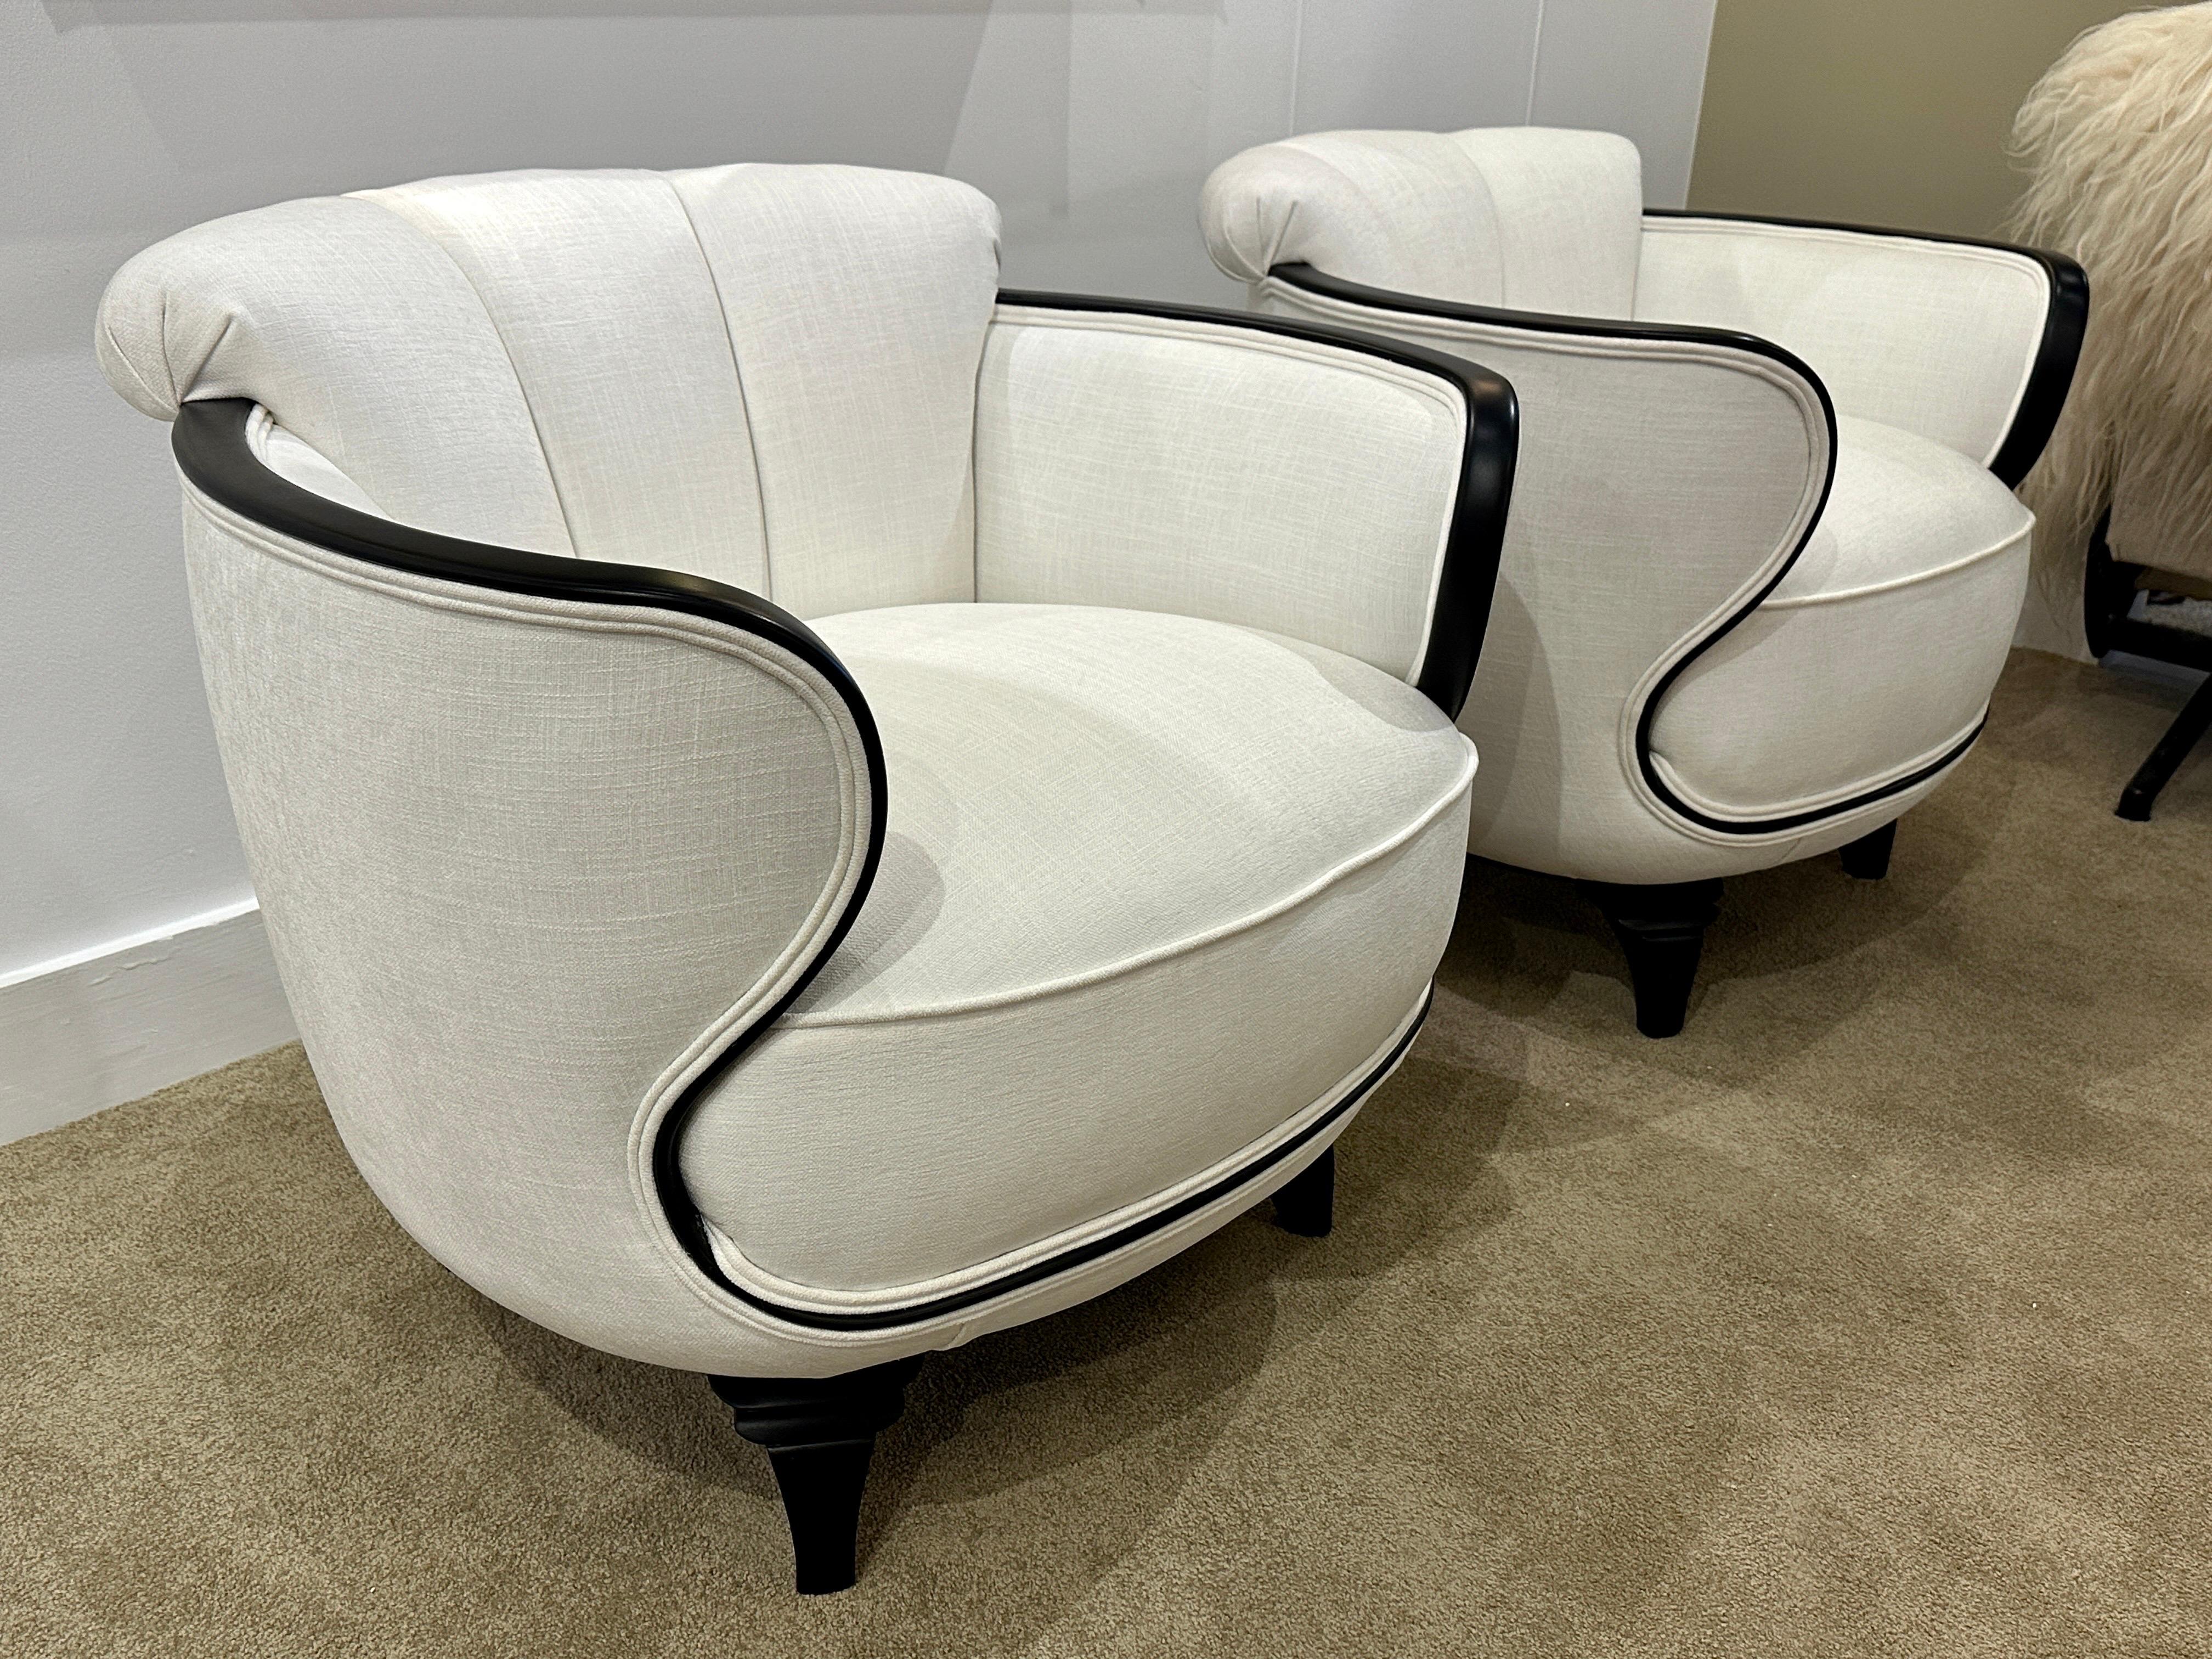 Pair of Art Deco oversized American designer chairs with an important ebonized wood trim and flared feet. Original design has been respected during re-upholstery by our experts. Luxurious and elegant all around - generous in scale and very